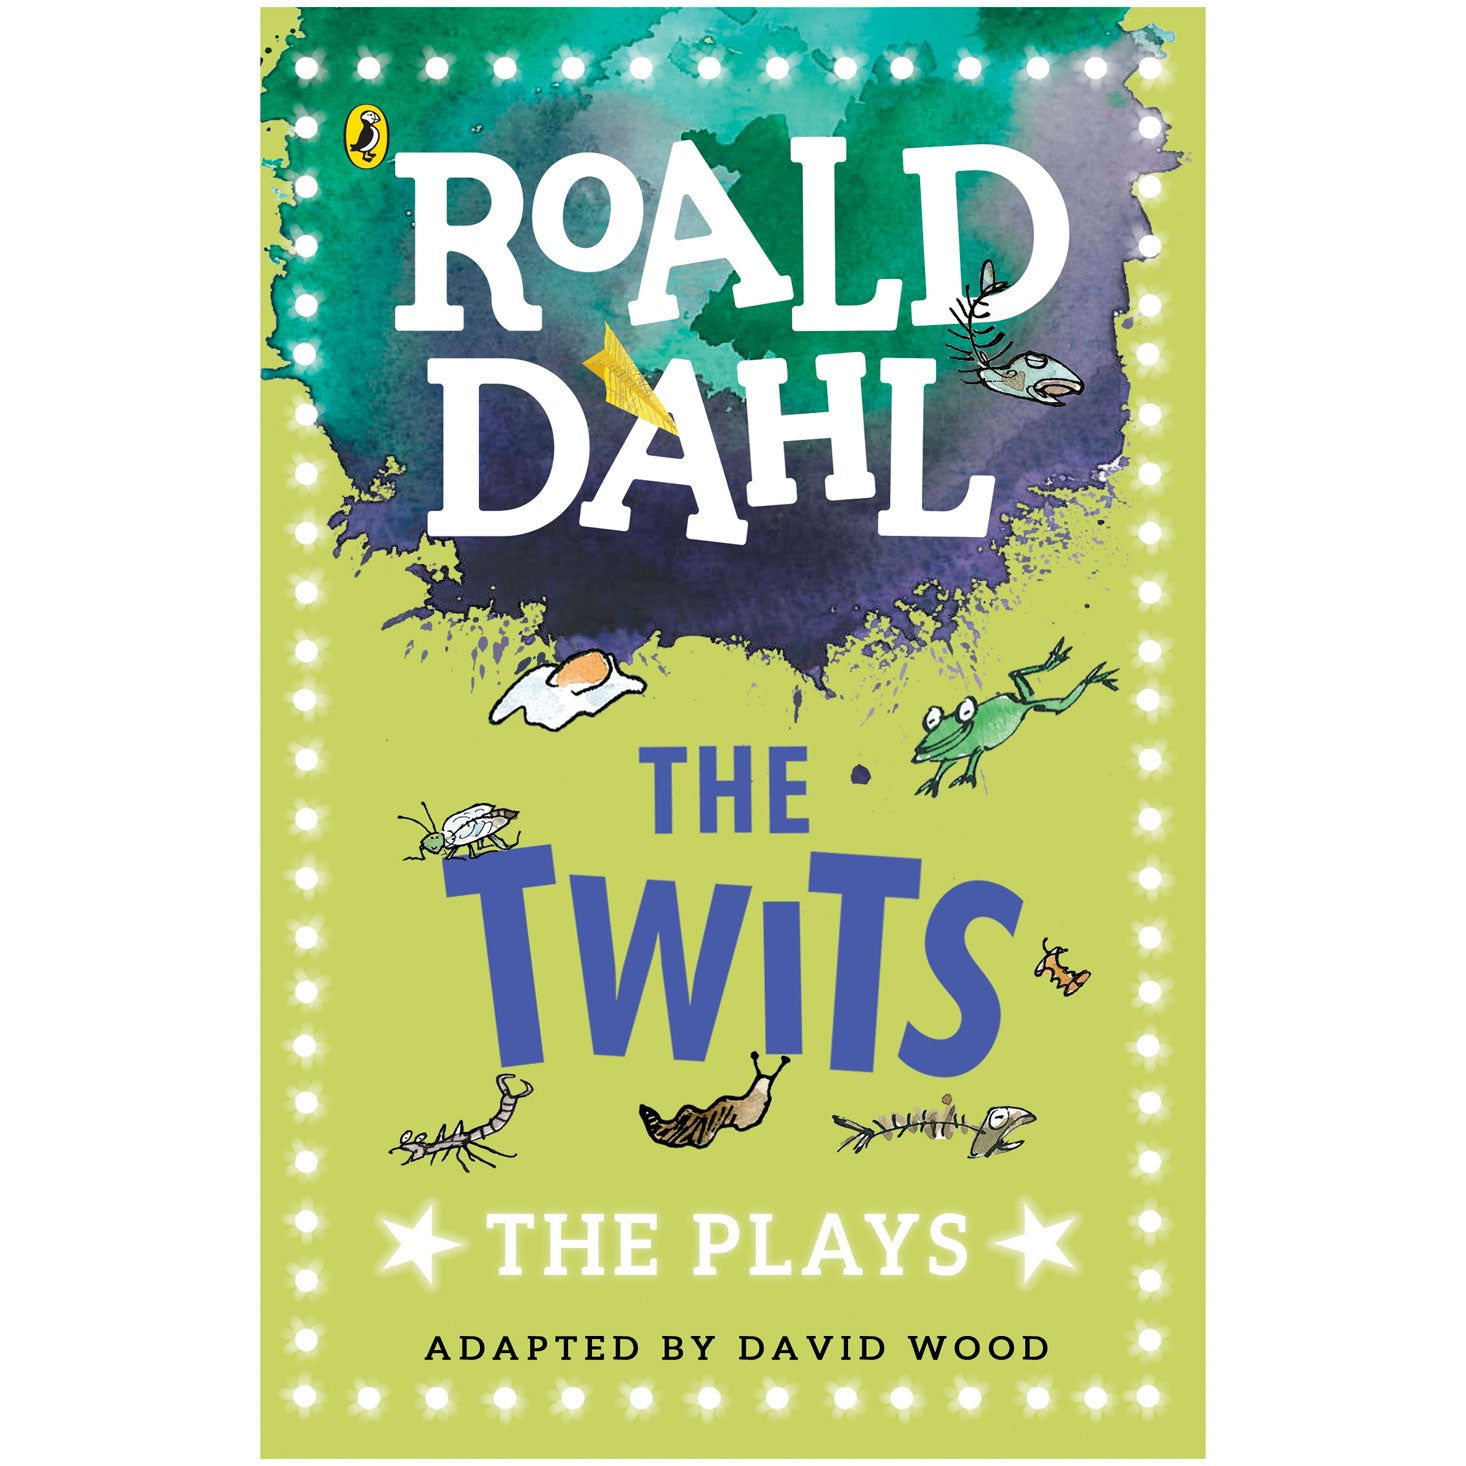 Plays based on Roald Dahl's The Twits and illustrated by Quentin Blake